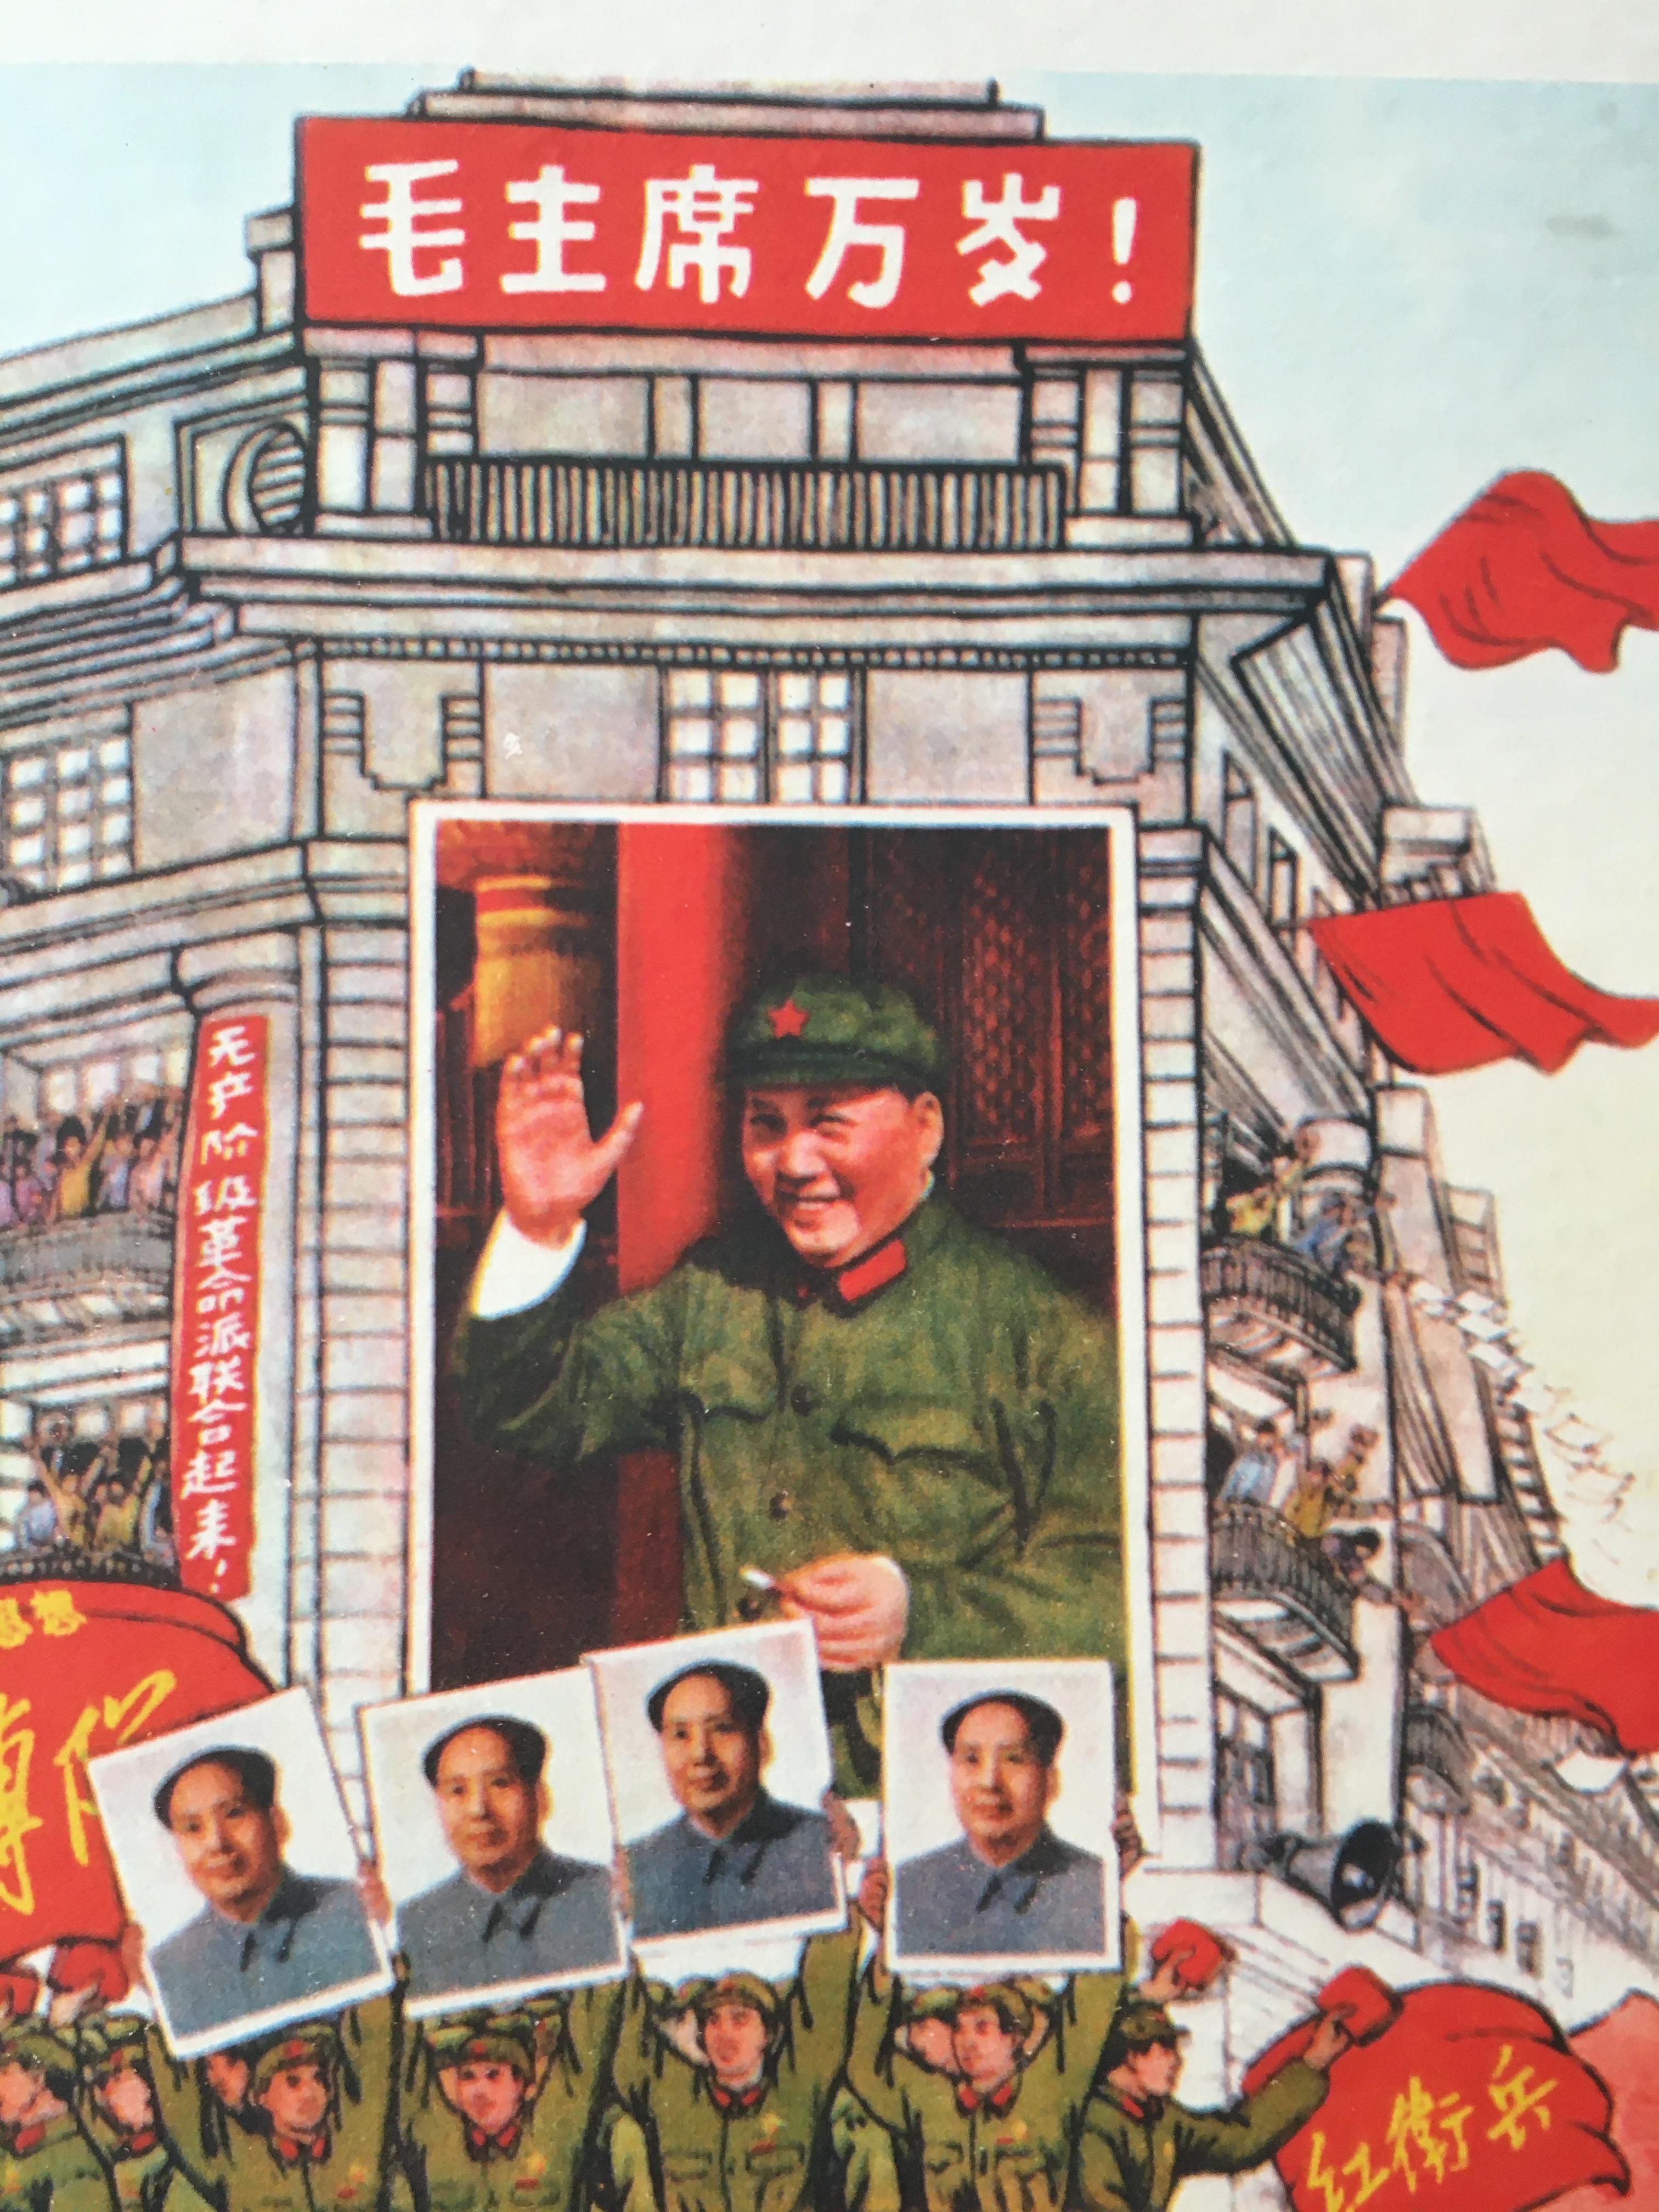 Other Original Vintage Chinese Propaganda Poster Featuring Mao's Little Red Book For Sale